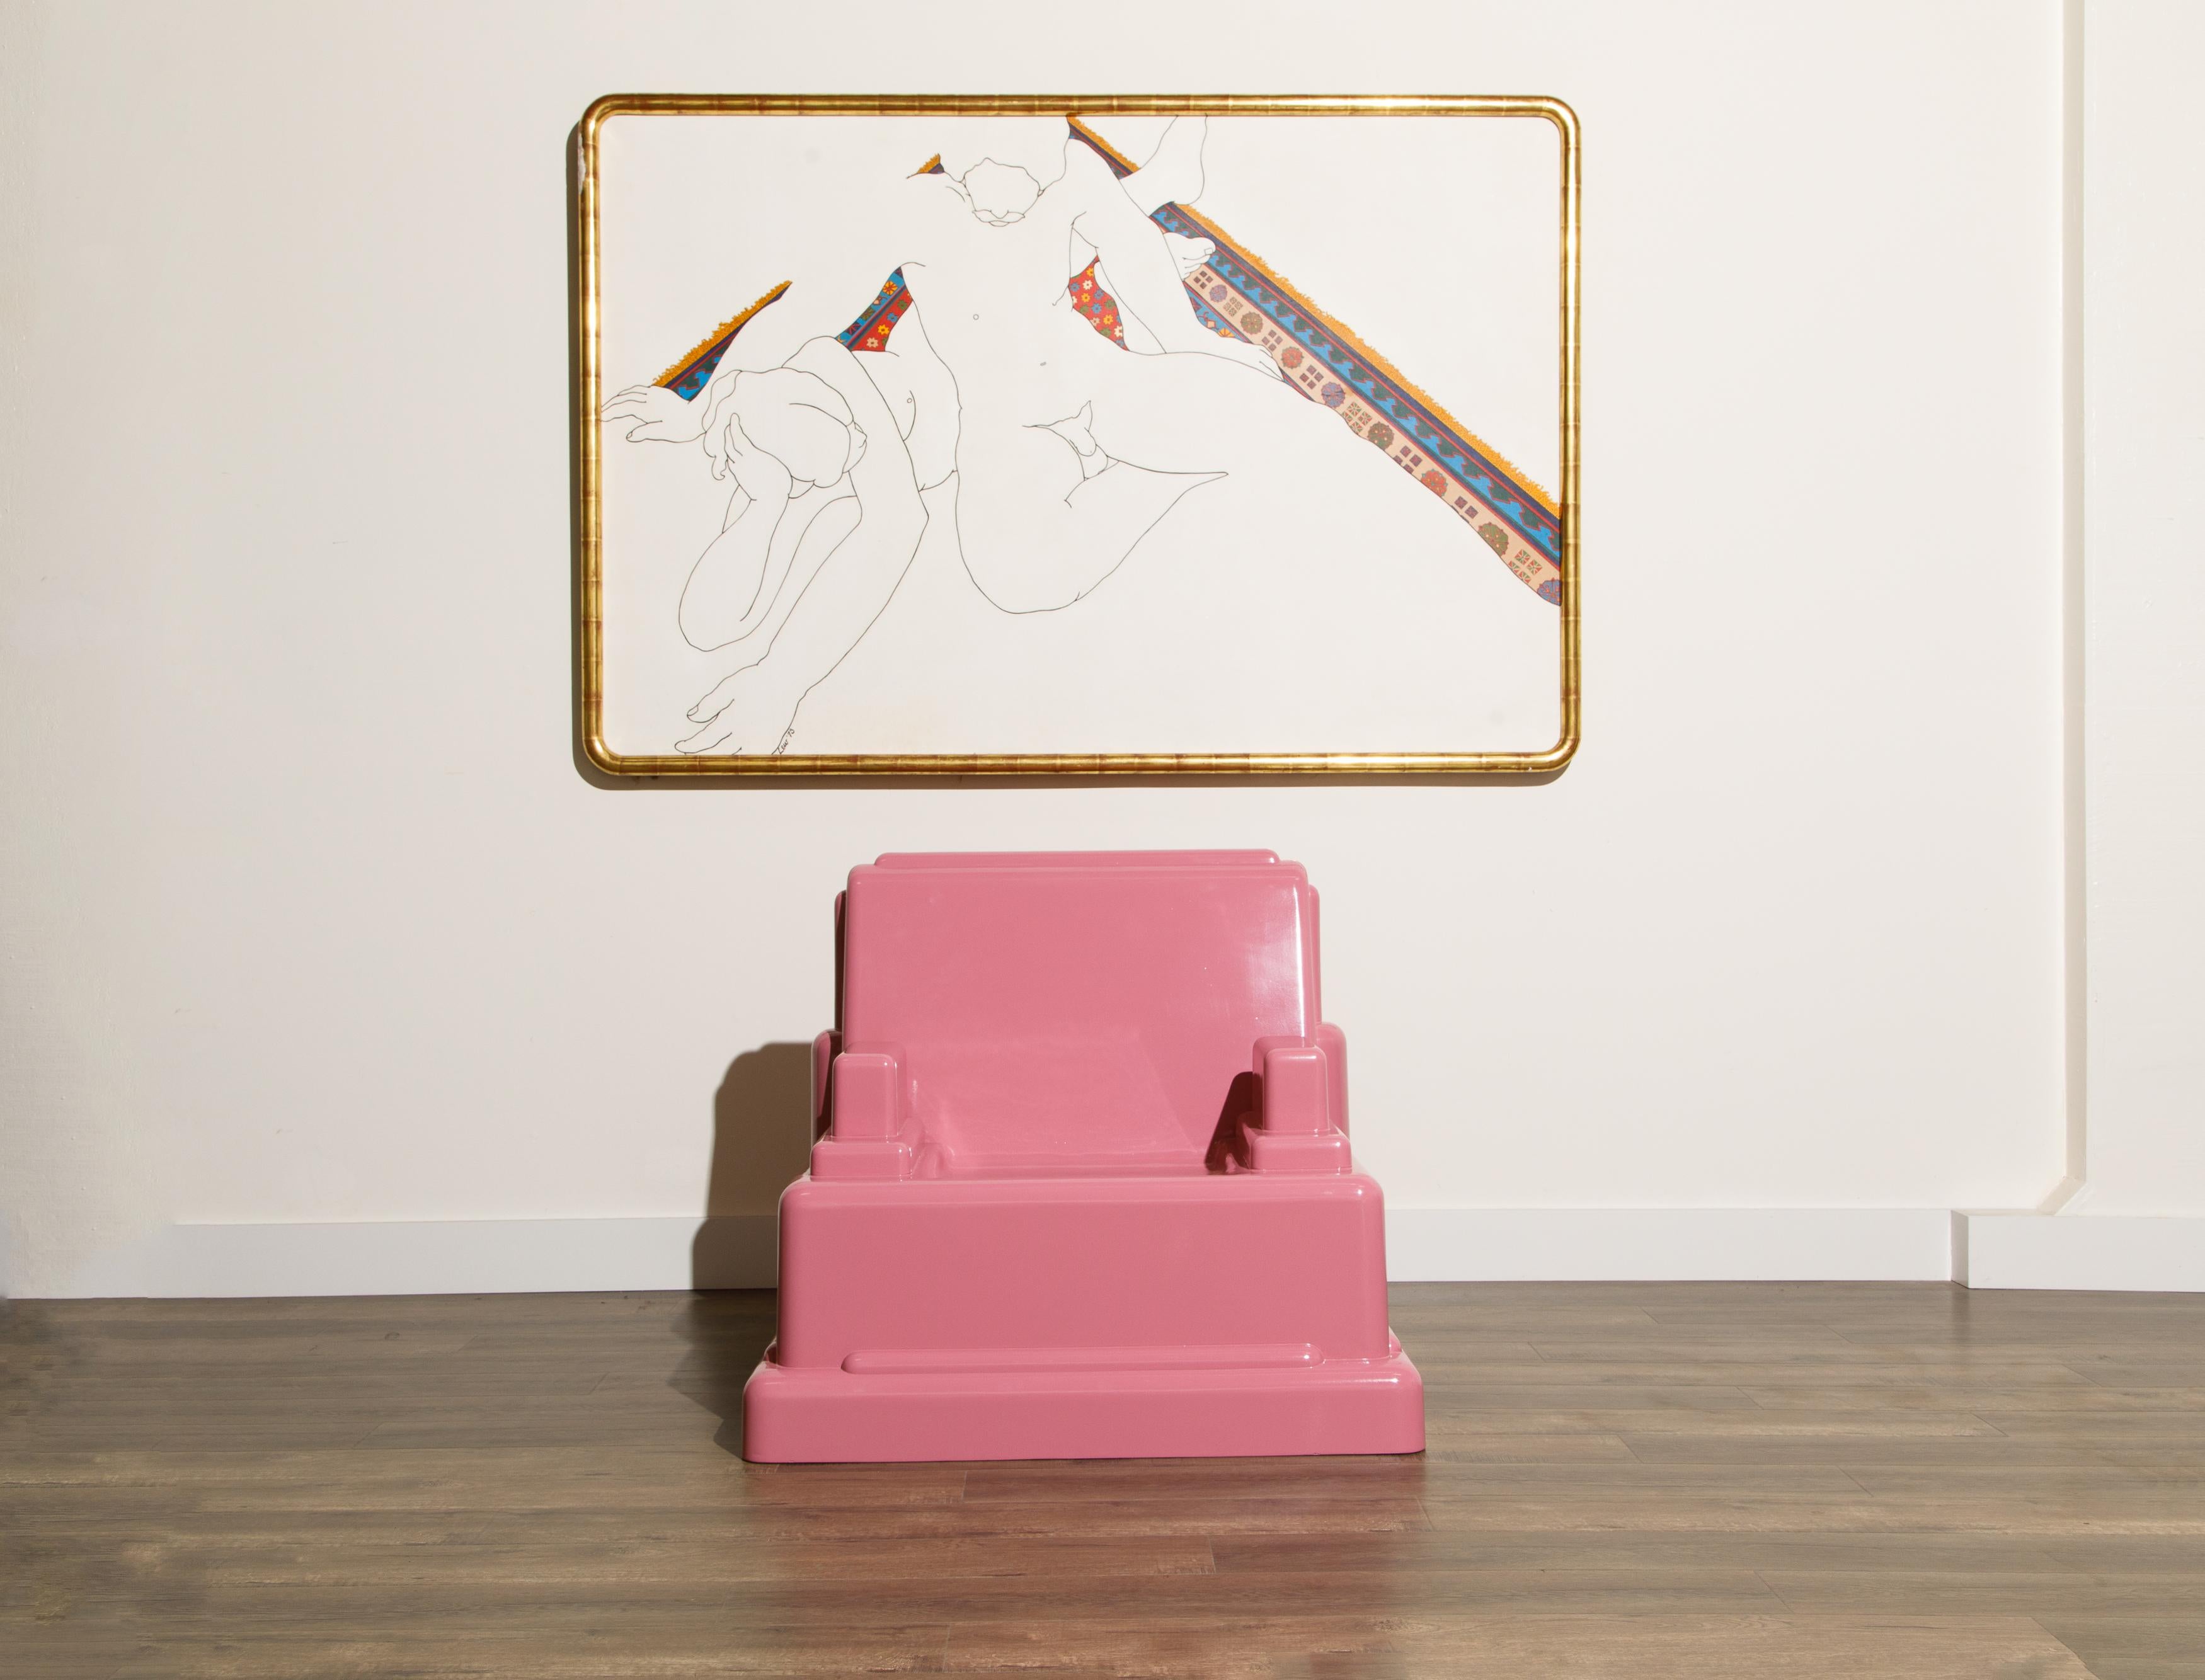 This conversation starter and Post-Modern collectors dream piece is the 'Roma' chair by Marco Zanini, designed in 1986 for Memphis Milano, Italy. Constructed of fiberglass, we fully restored it in a dusty rose (pink) colored french polish lacquer,